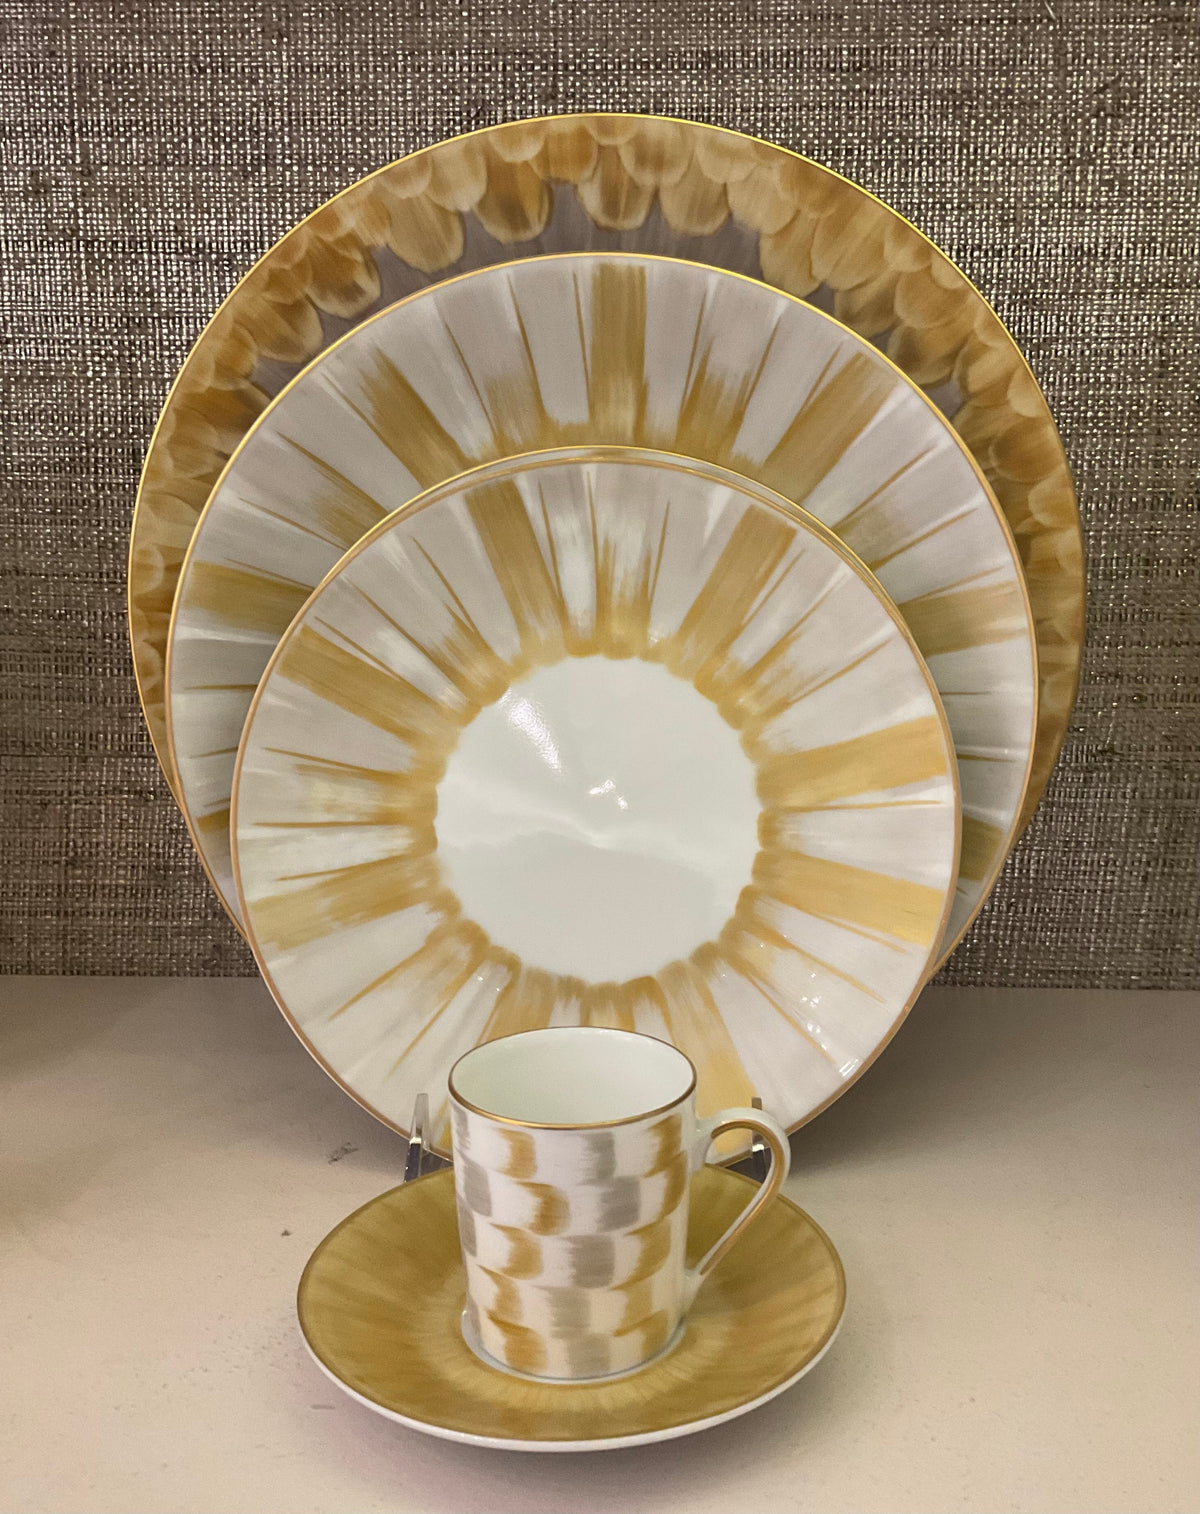 Straight Coffee (Espresso) Cup and Saucer - Zephyr 1